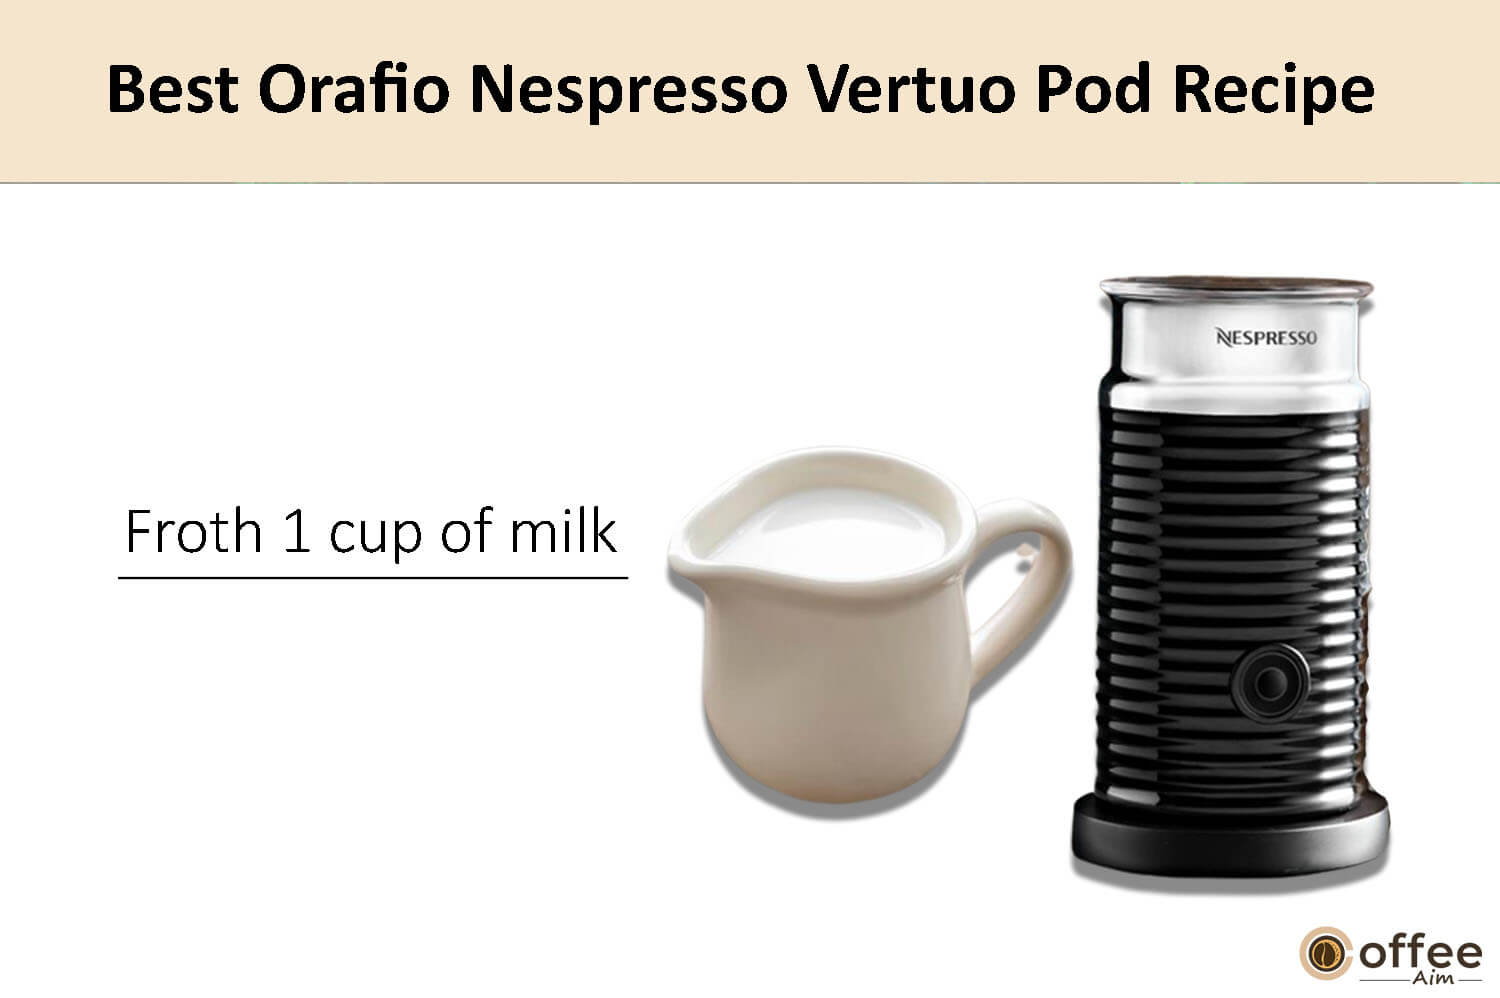 In this image, I clarify the preparation instructions for crafting the finest Orafio Nespresso Vertuo coffee pod.